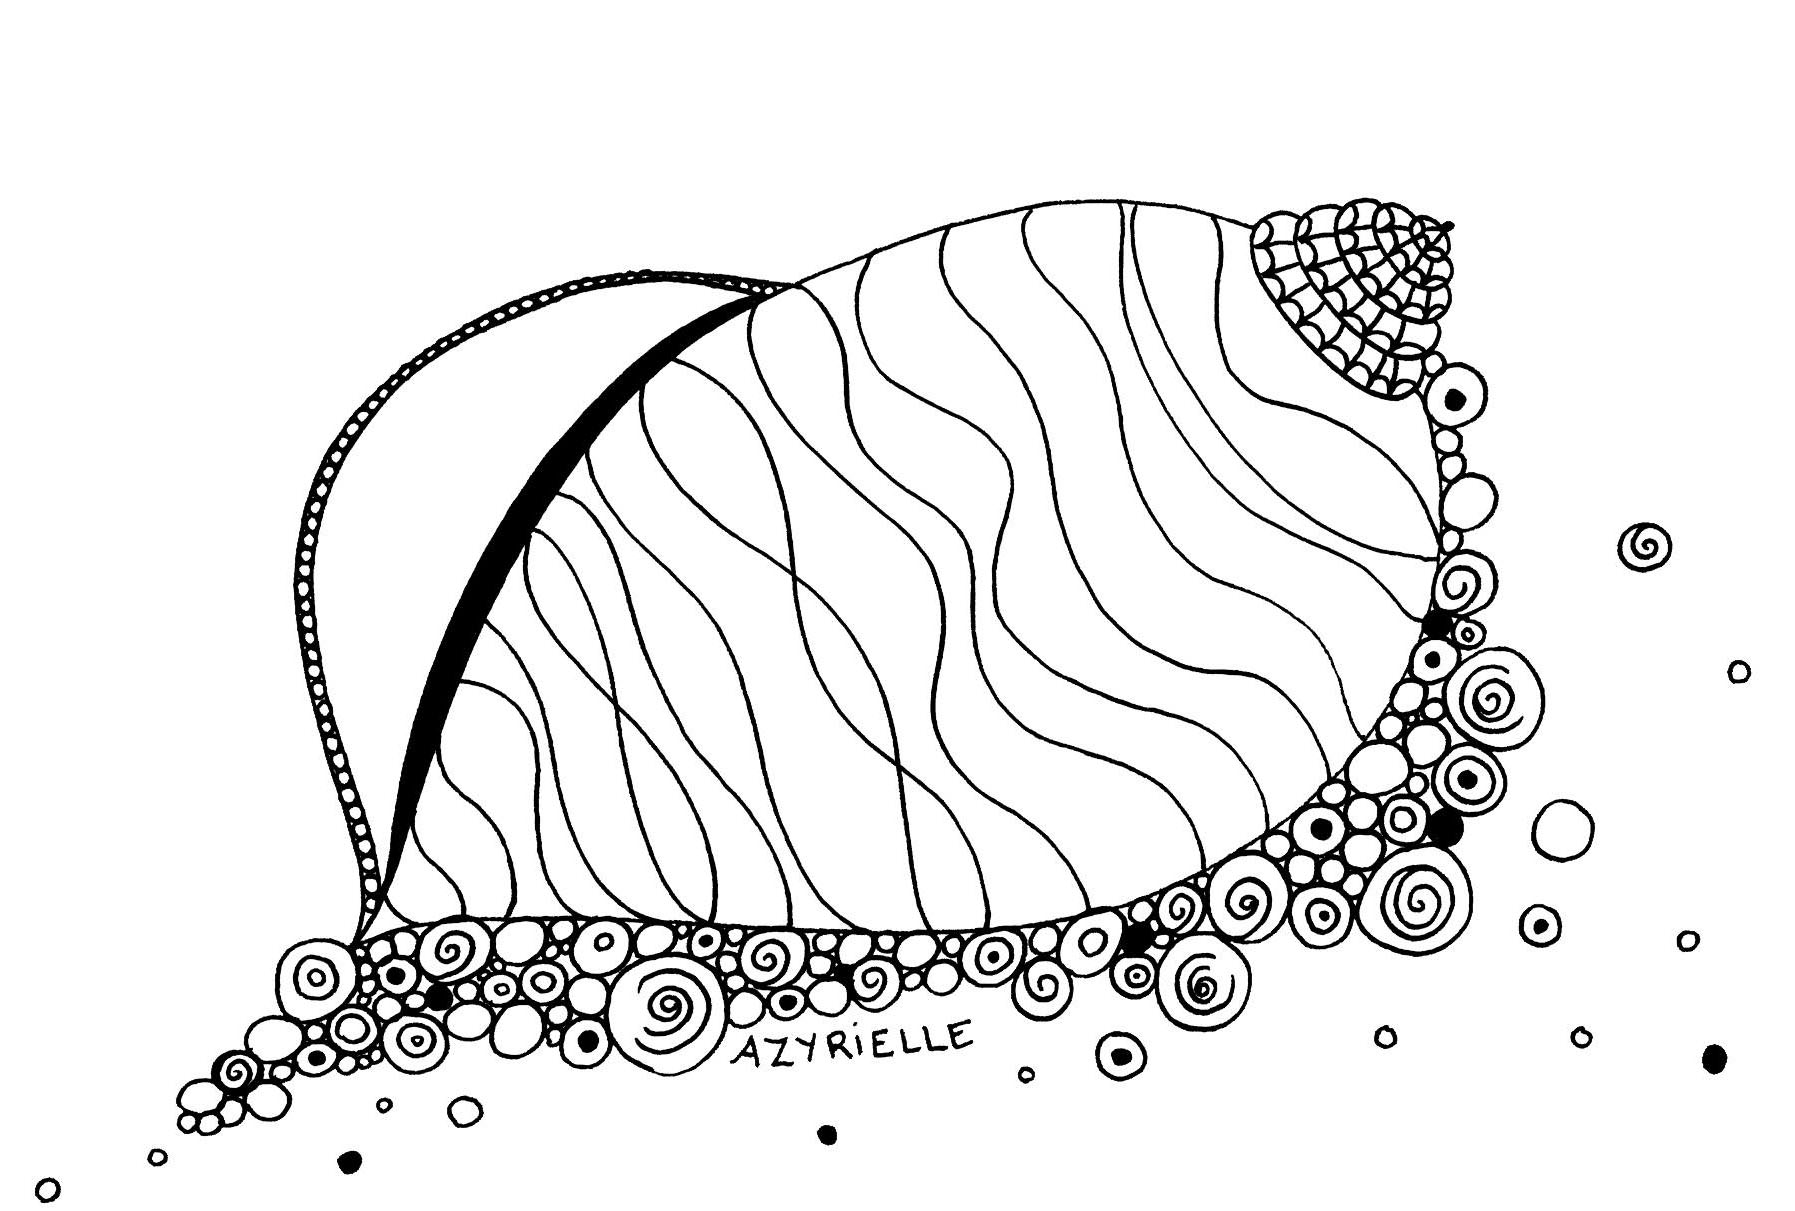 Funny coloring page representing a shell, Artist : Azyrielle